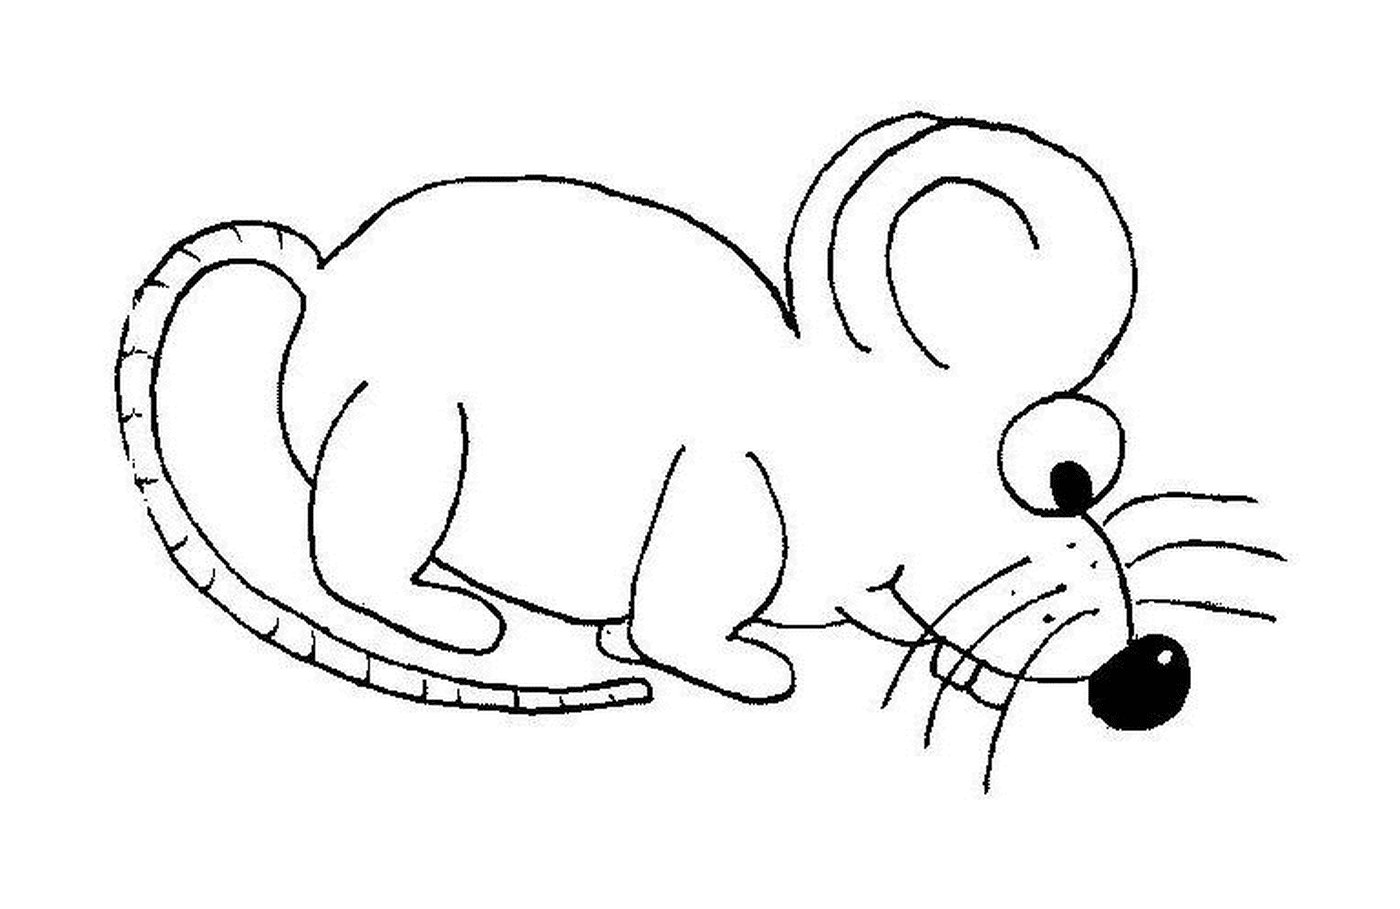  A mouse eating 